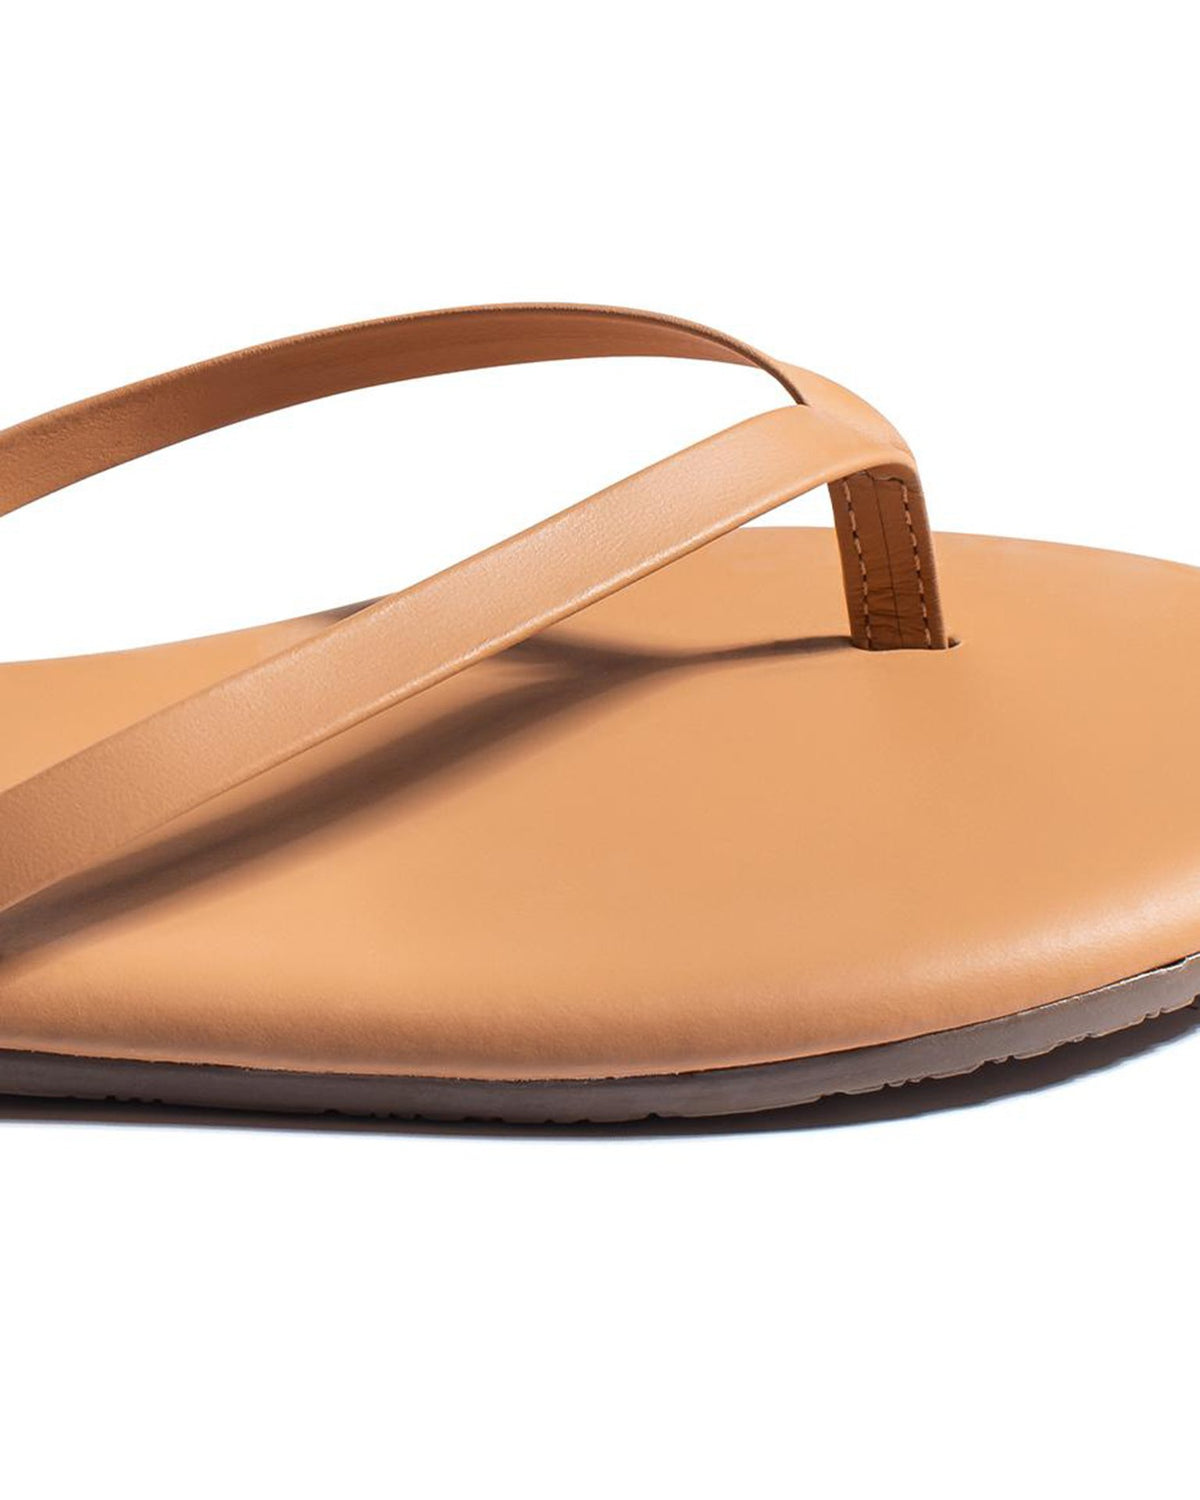 Tkees Shoes Nudes Flip Flop in Sunbliss